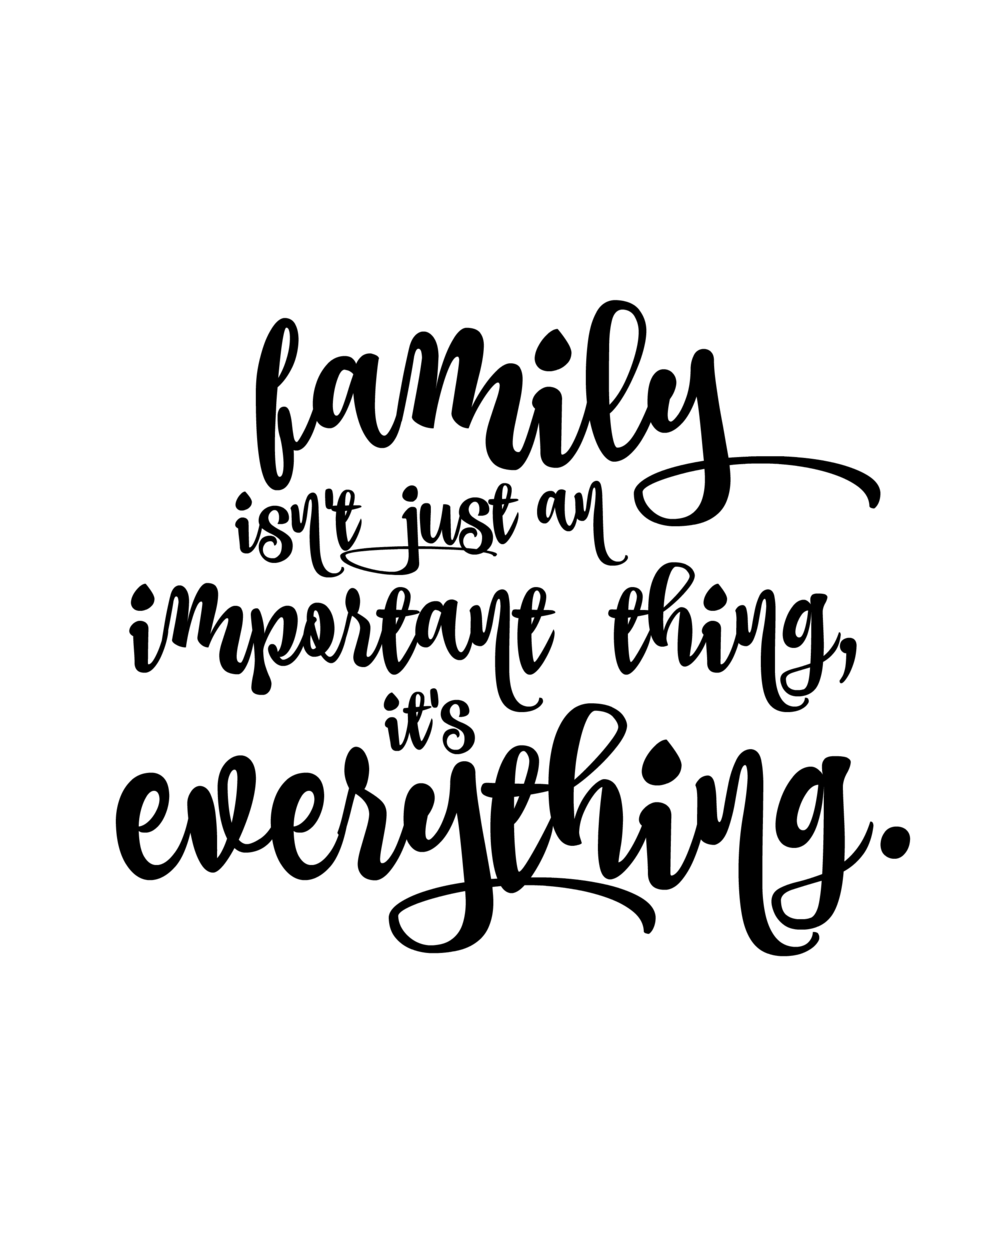 Family Is Everything Free Printable 8x10 floral black and white